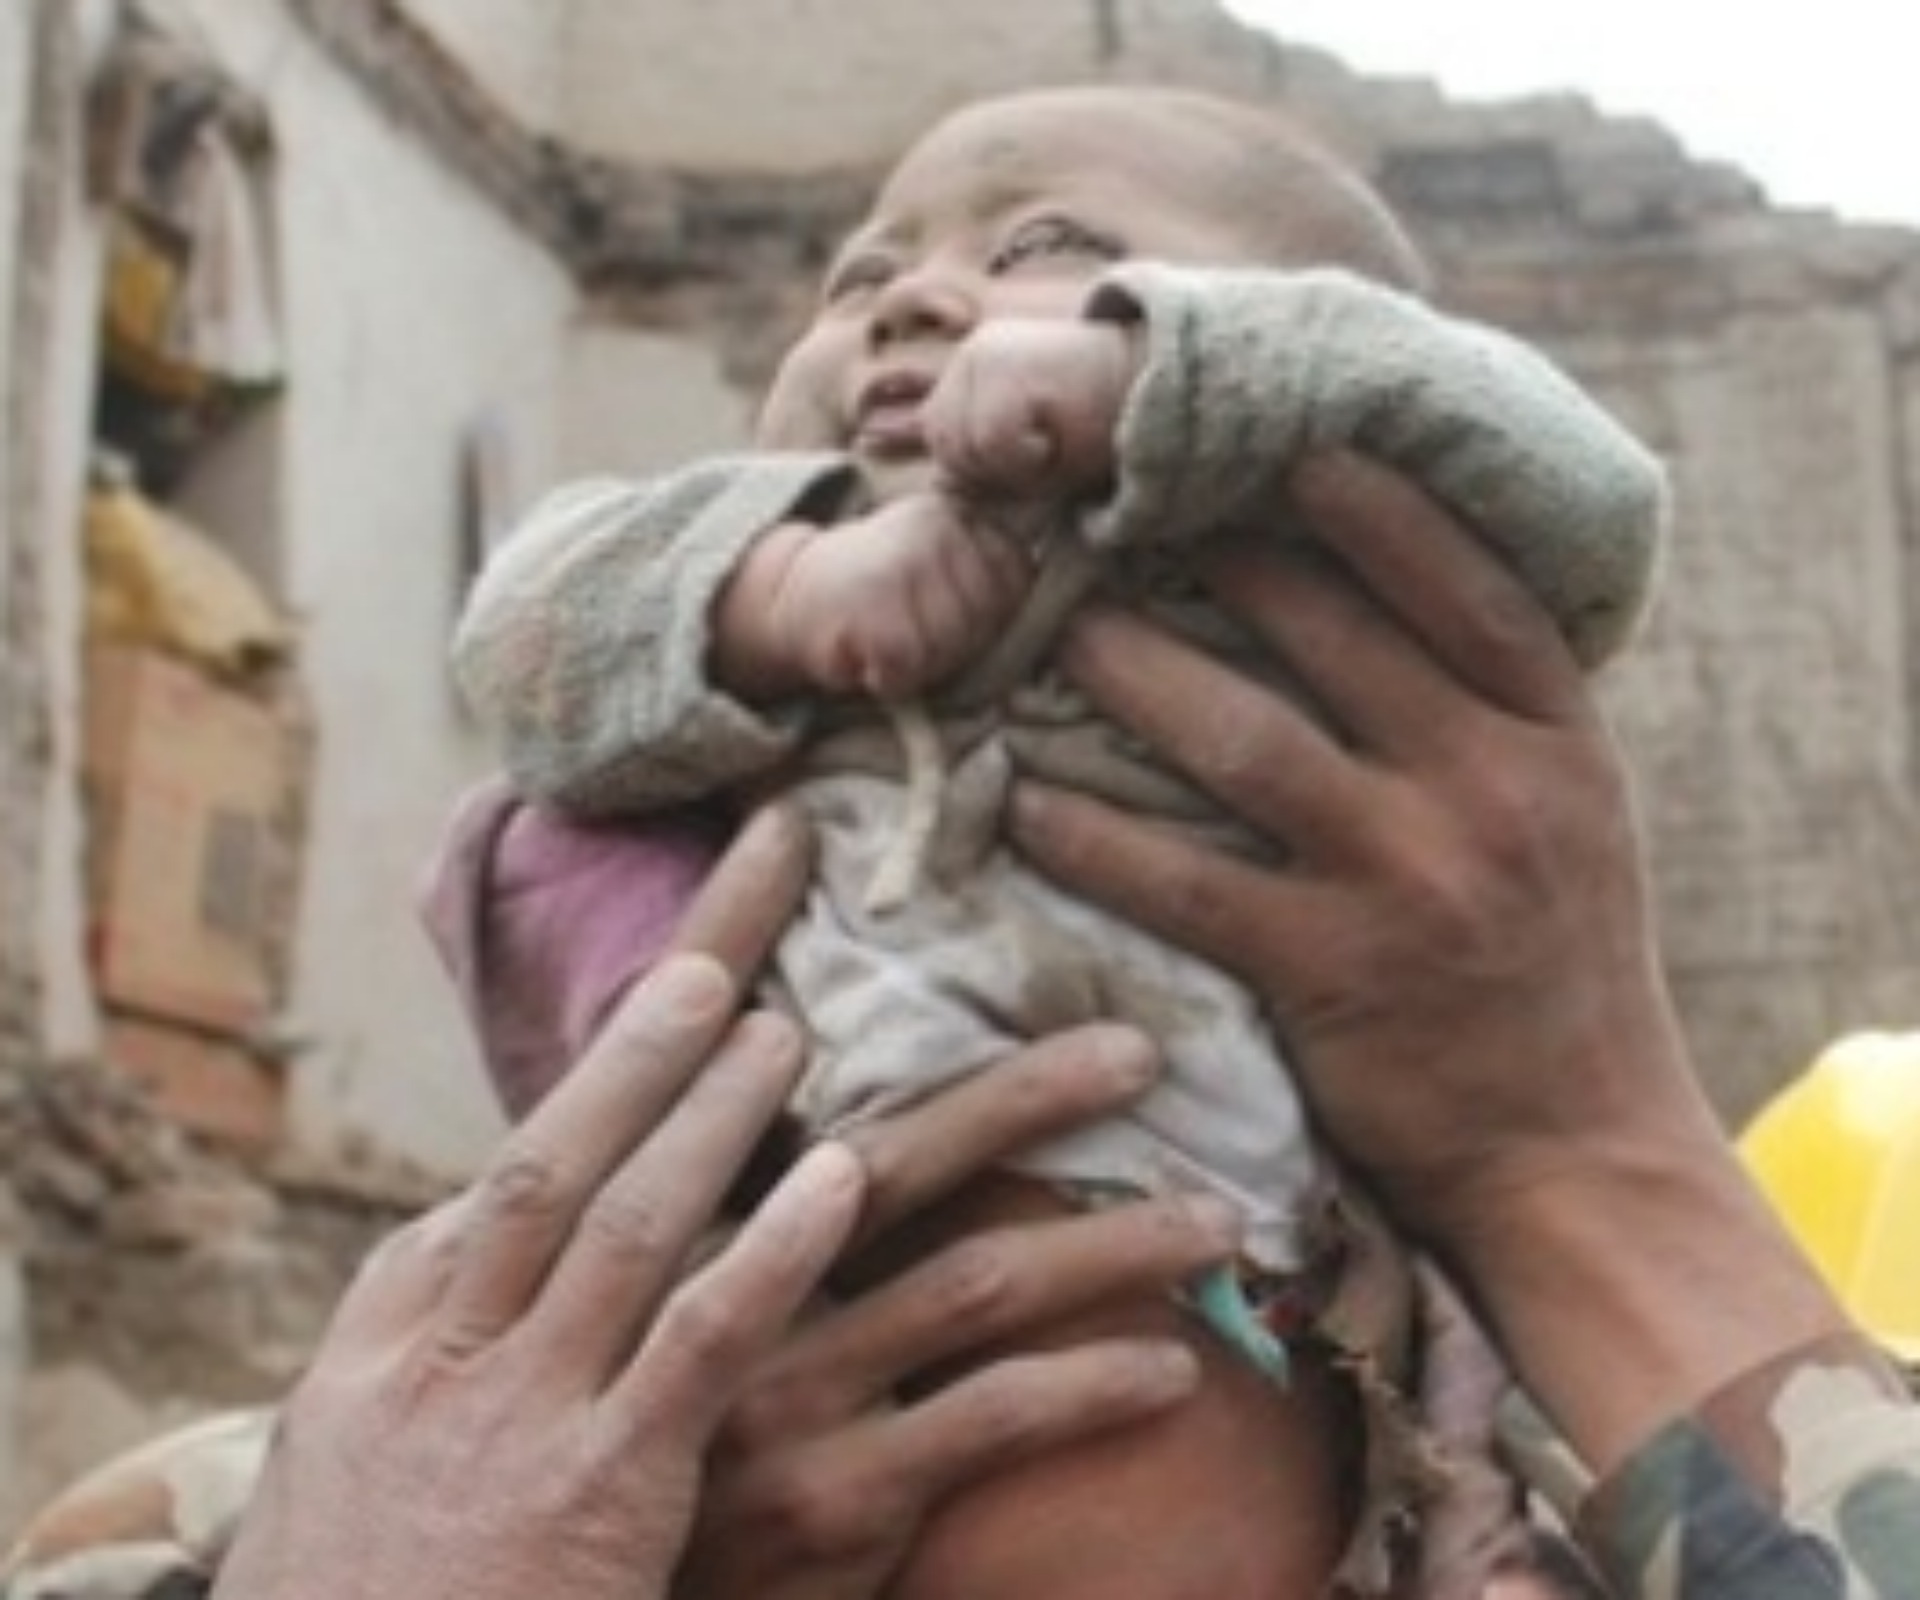 Baby boy trapped in Nepal earthquake rubble pulled out alive after 22 hours.